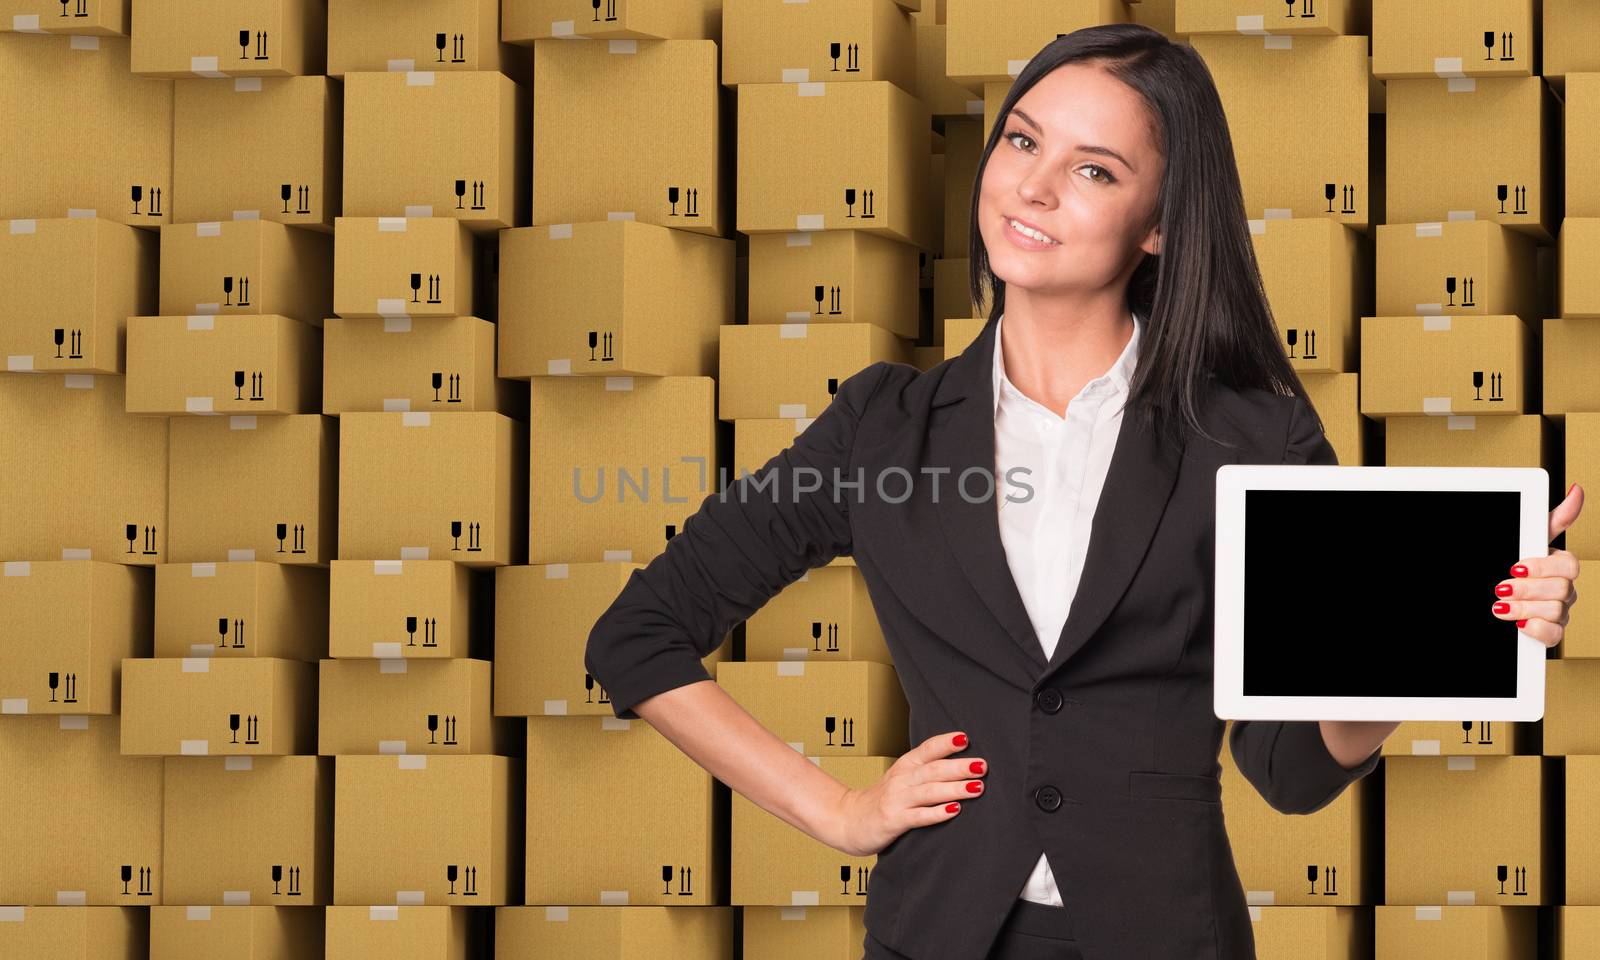 Smiling young woman holging tablet and looking at camera on abstract cardboard boxes set  background